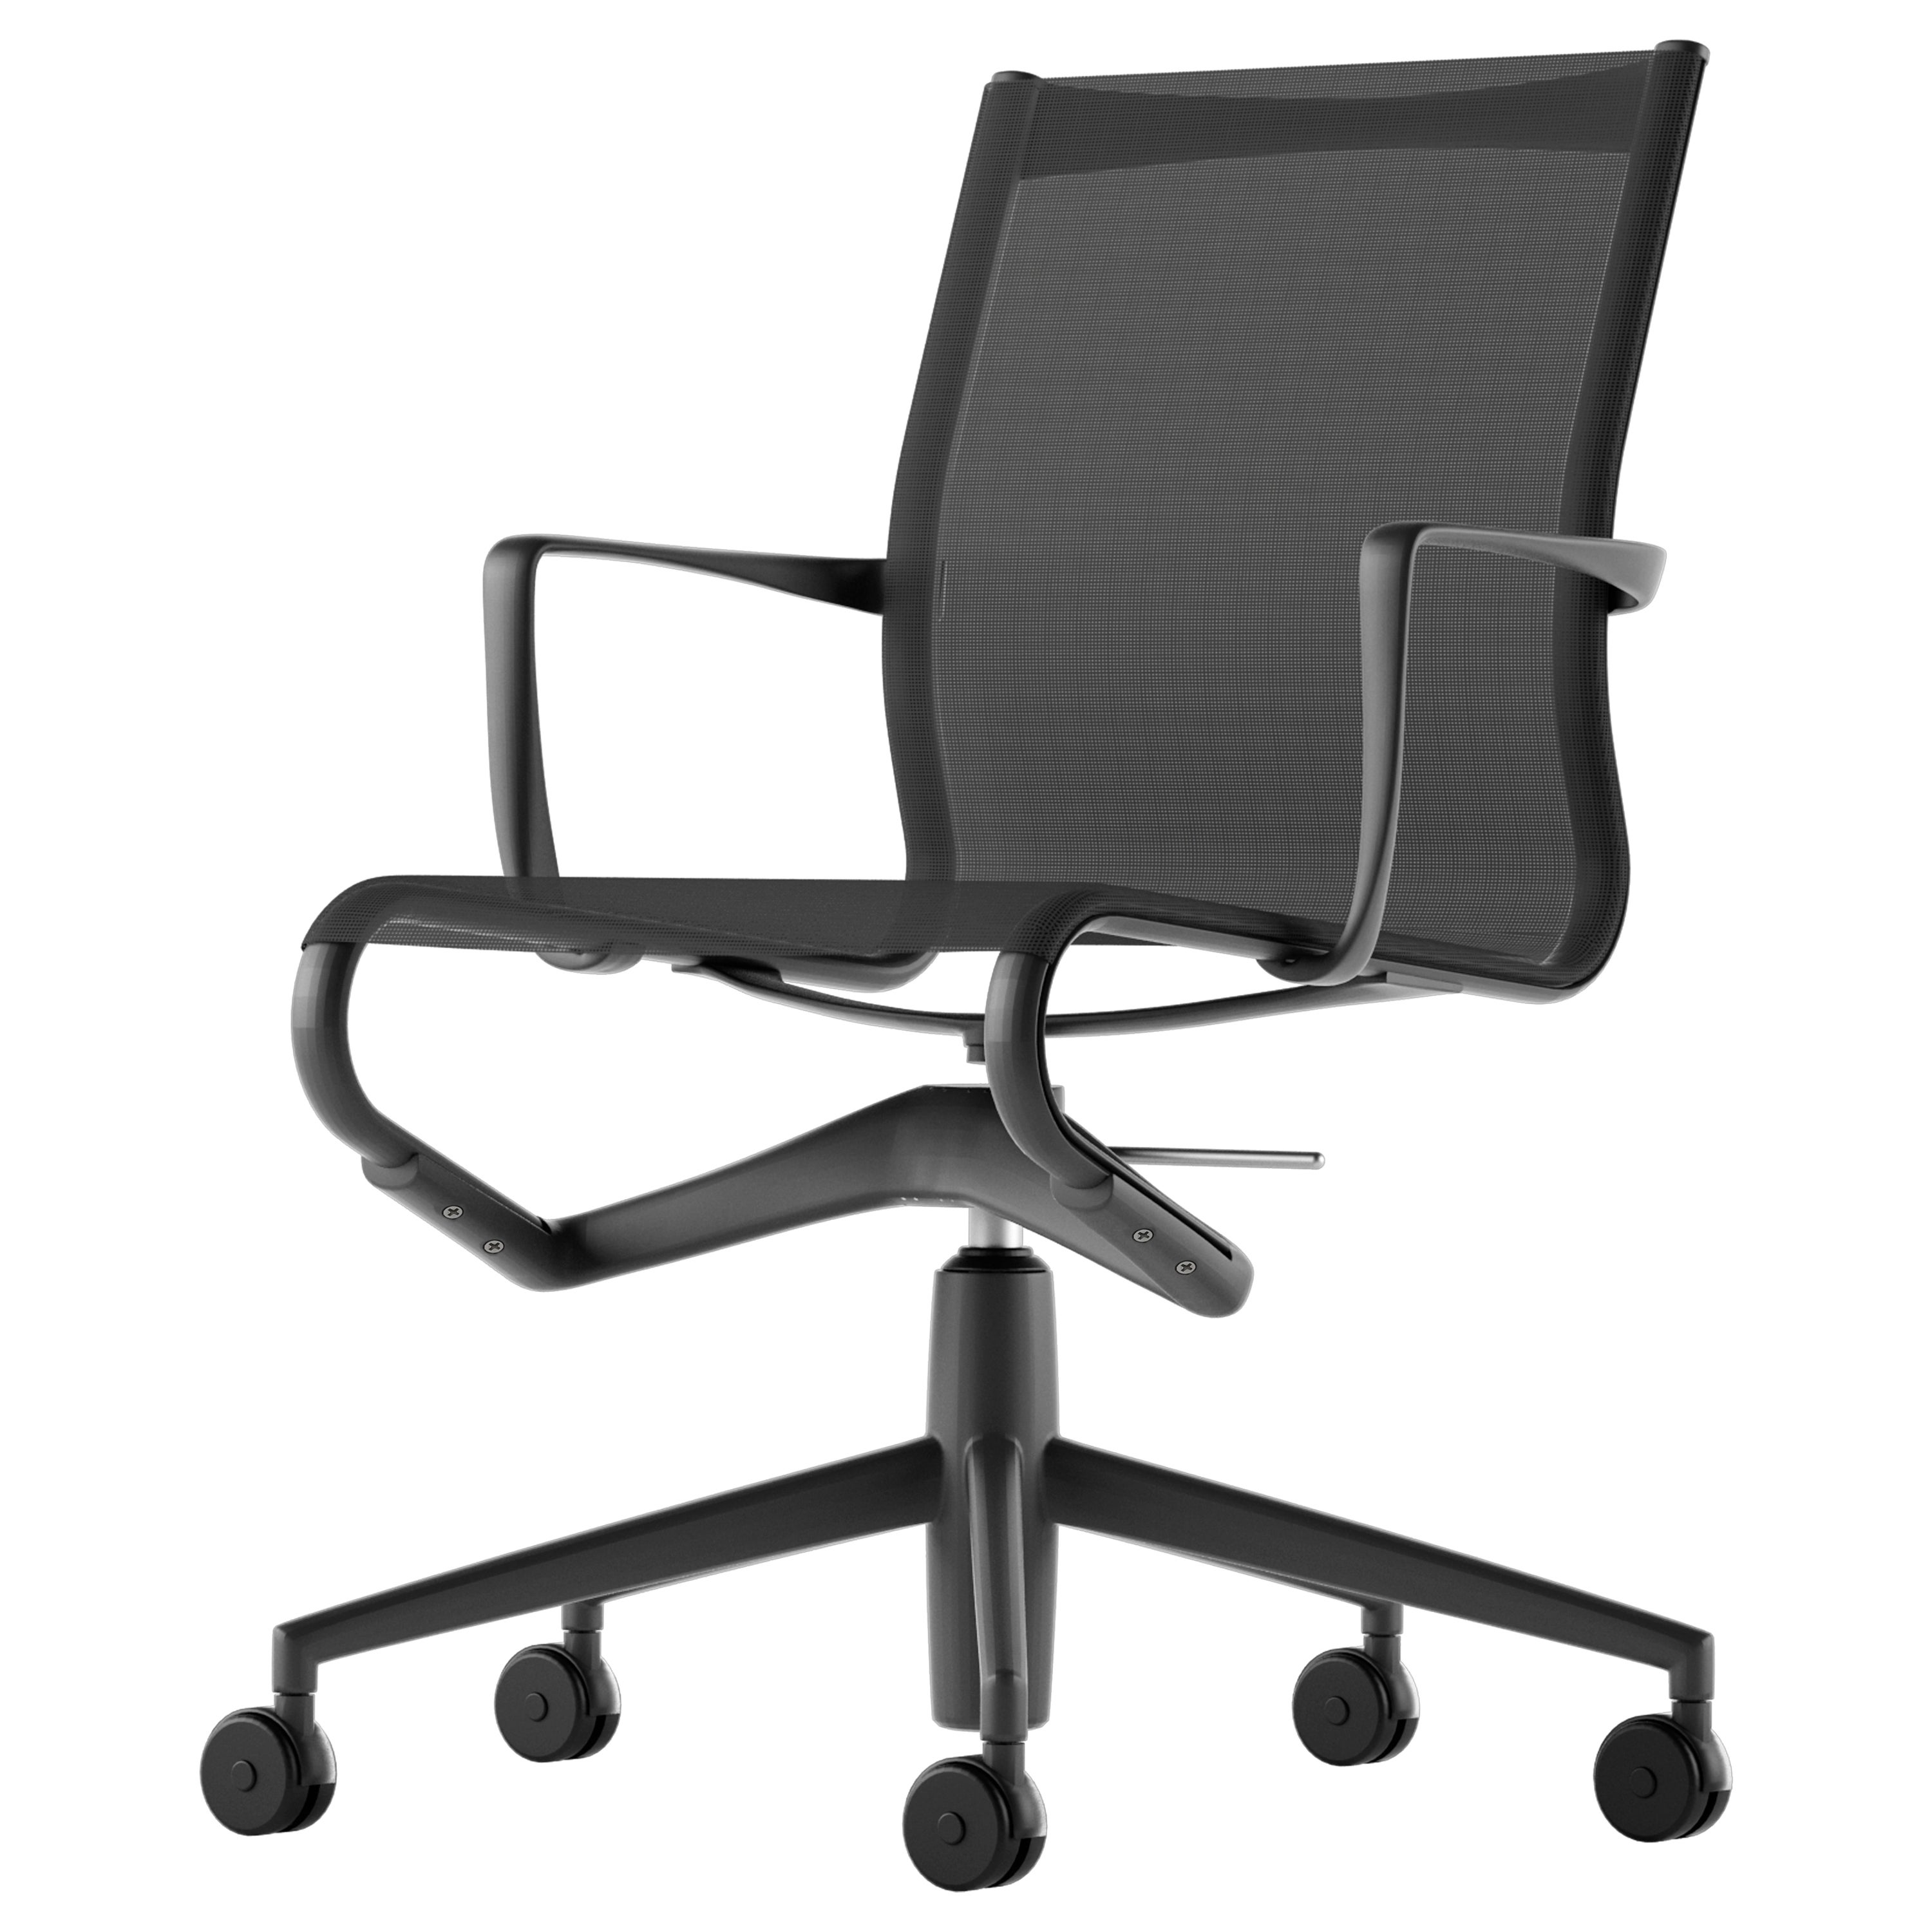 Alias 434 Rollingframe 44 Chair in Grey Melange Mesh & Lacquered Aluminum Frame For Sale